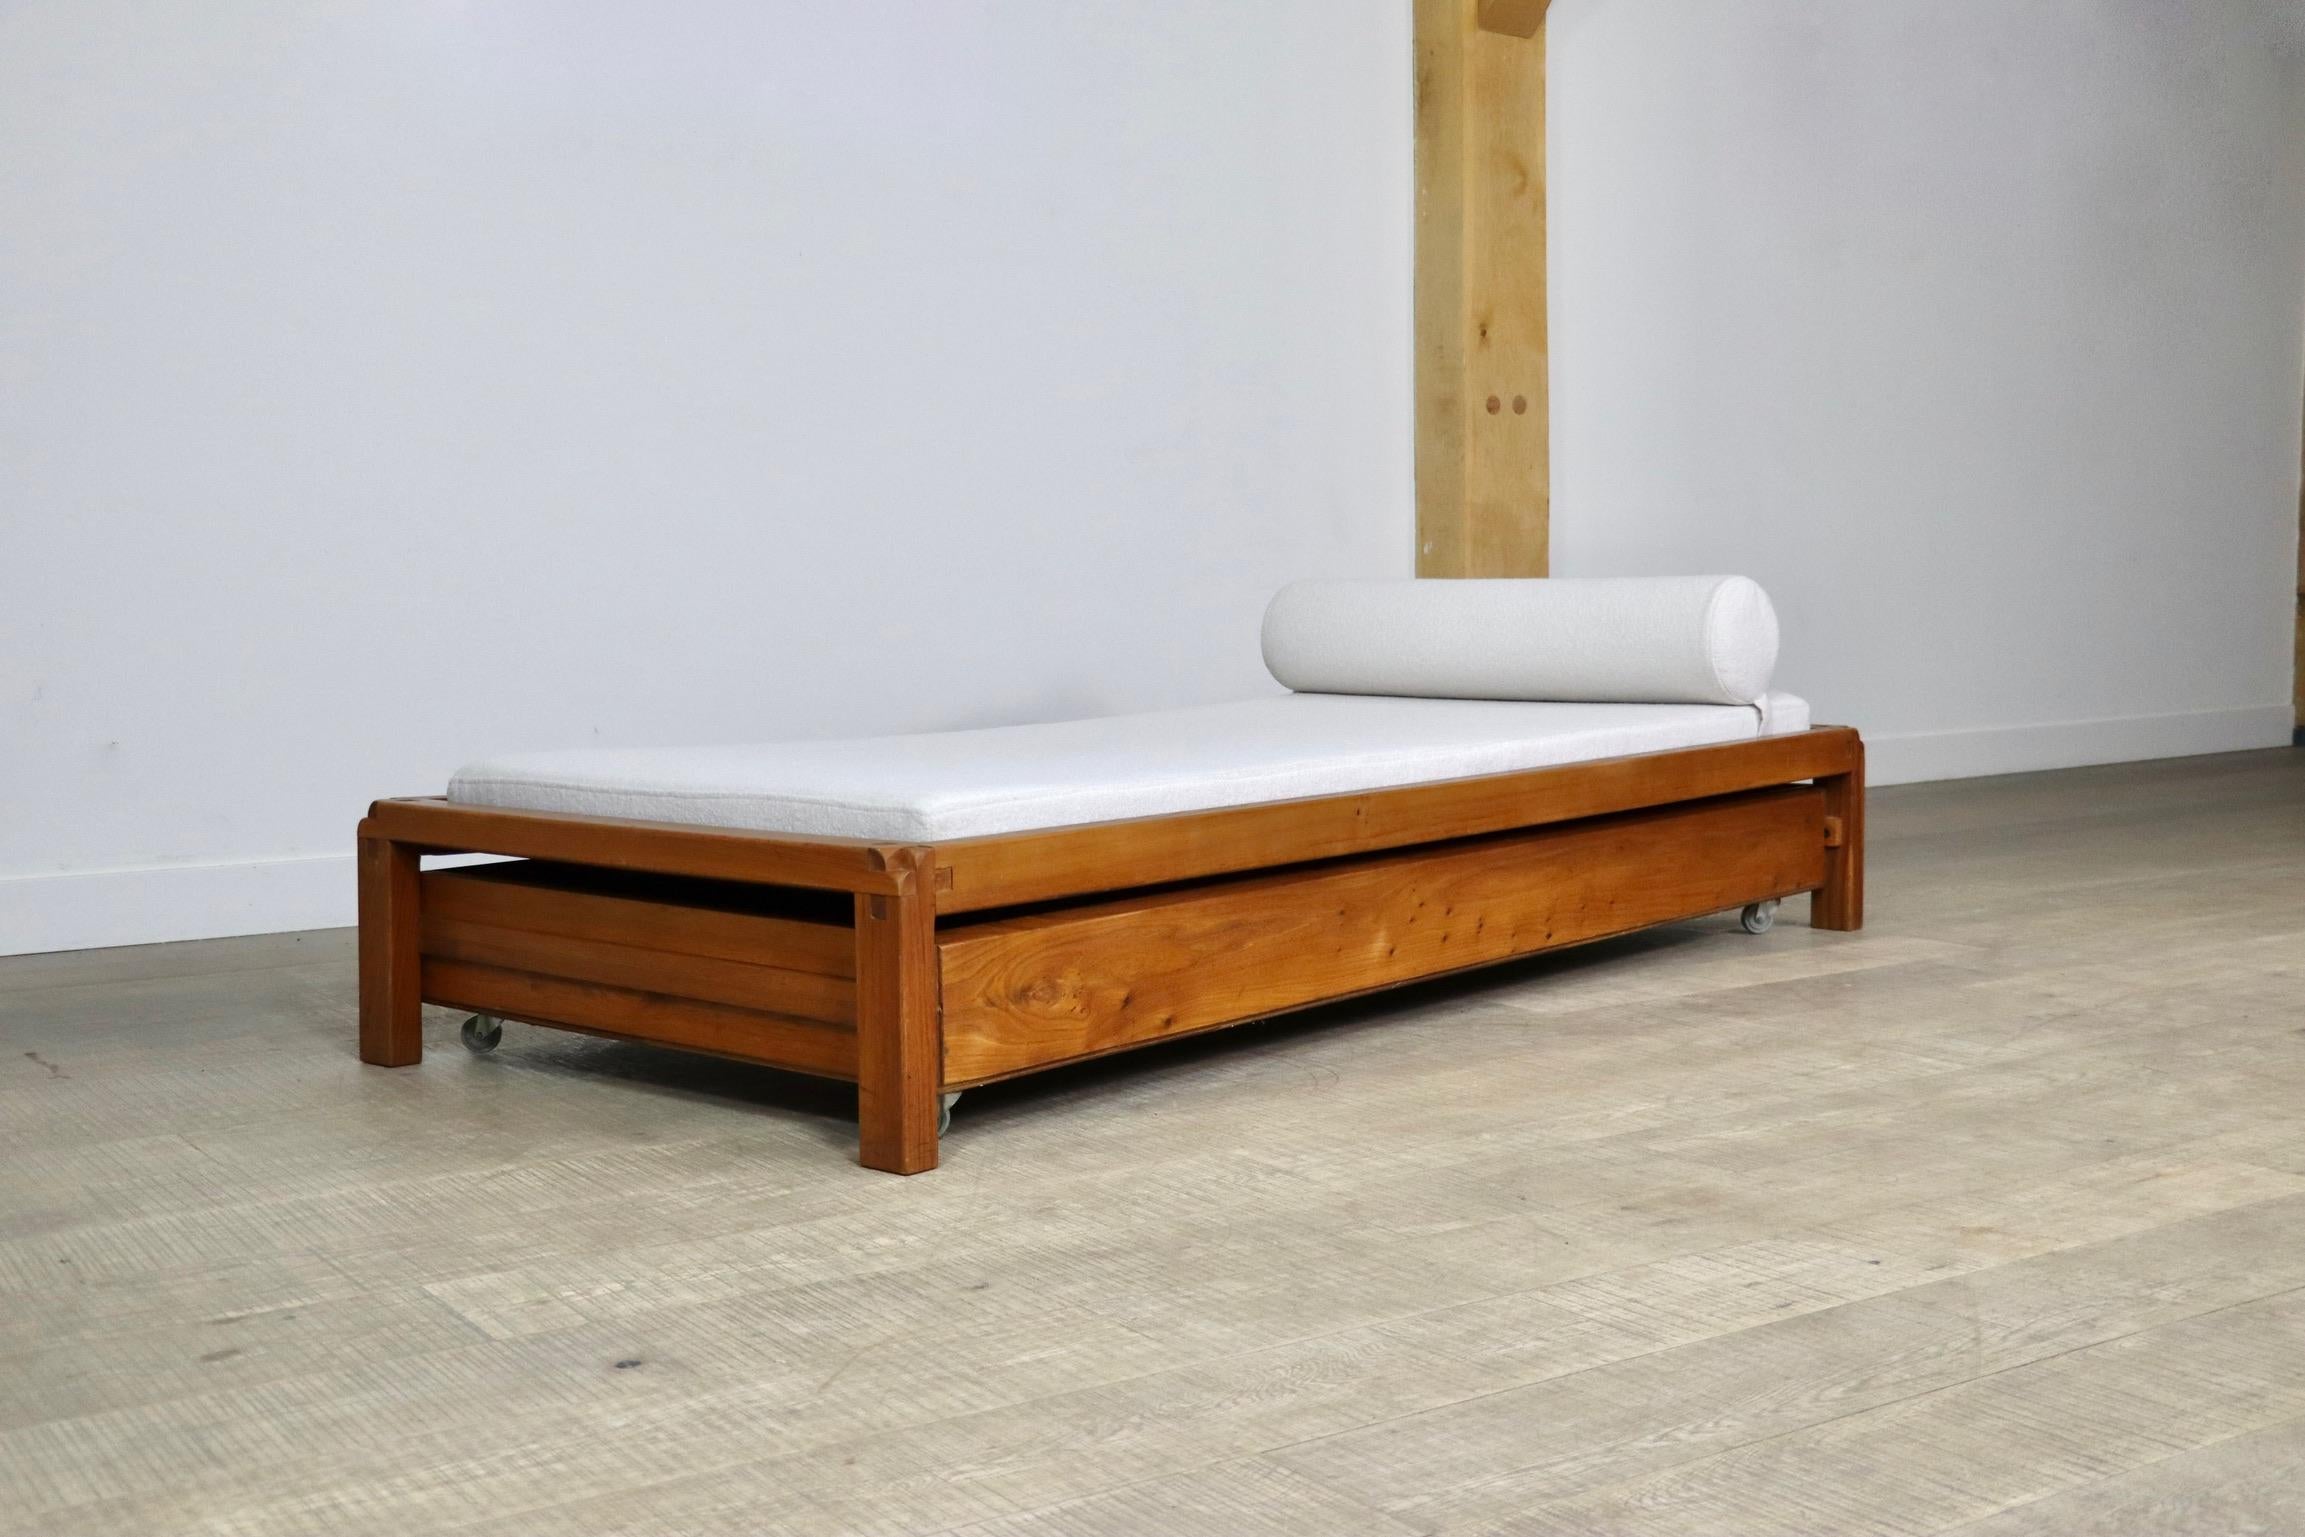 Stunning daybed model L03 in solid Elm-wood by the great French designer Pierre Chapo.

The breathtaking design with the iconic Chapo trademark wood joints which were created as a result of the pioneering 48 x 72 assembly ratio. With a newly